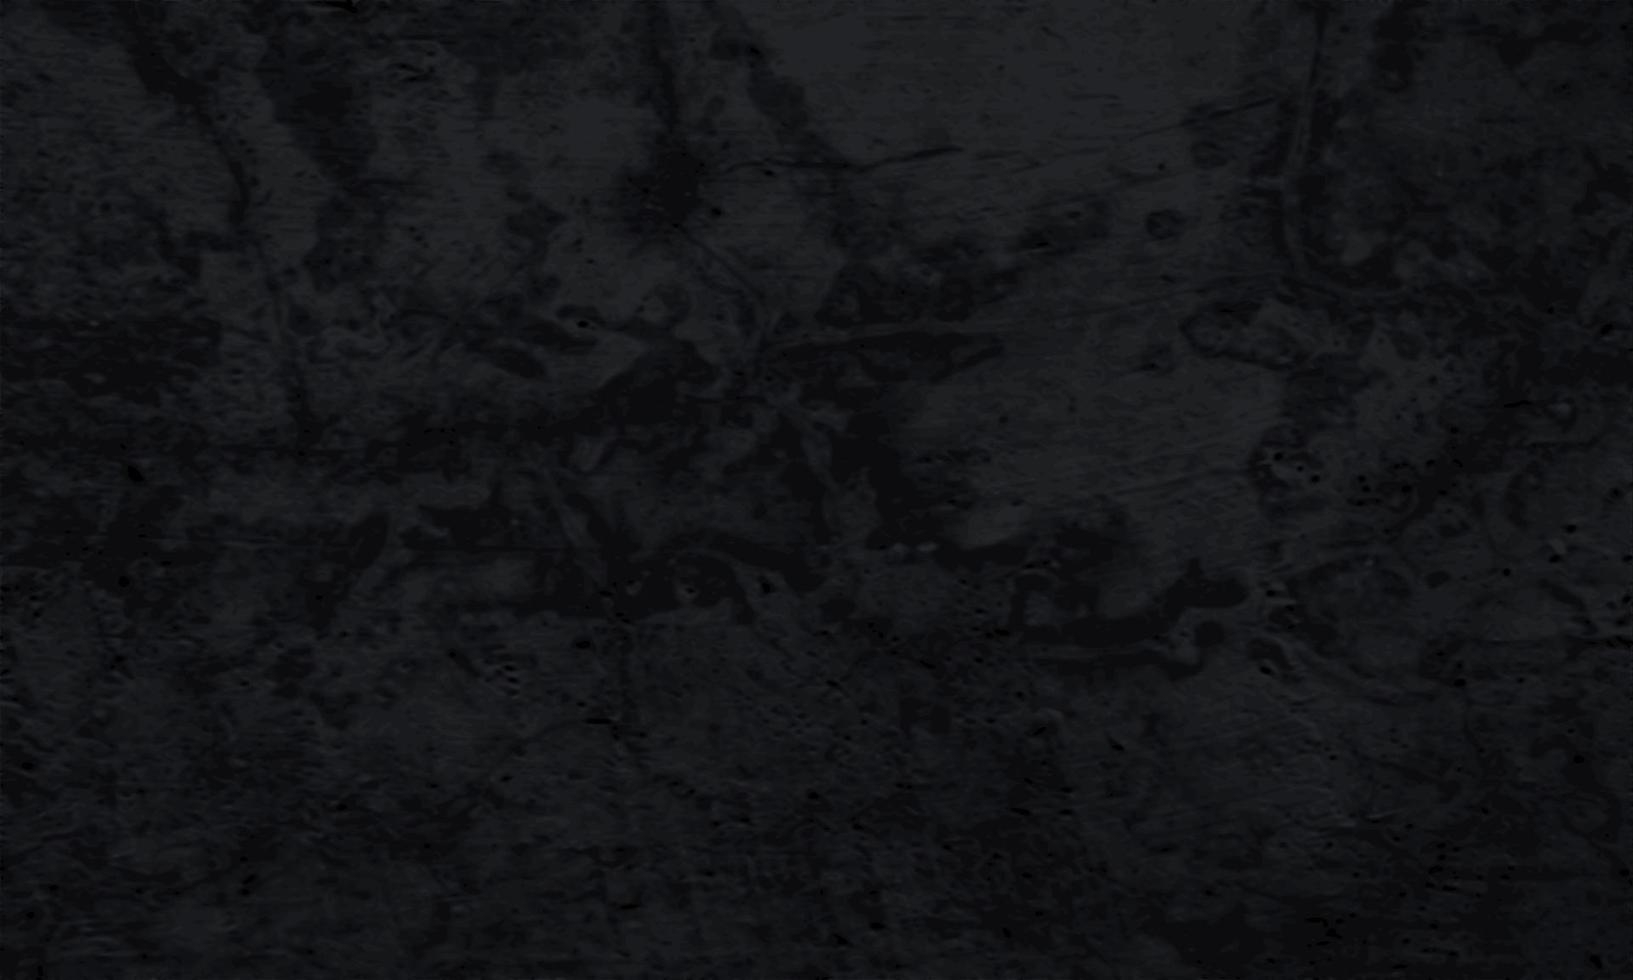 Abstract Black Grunge Texture Background vector